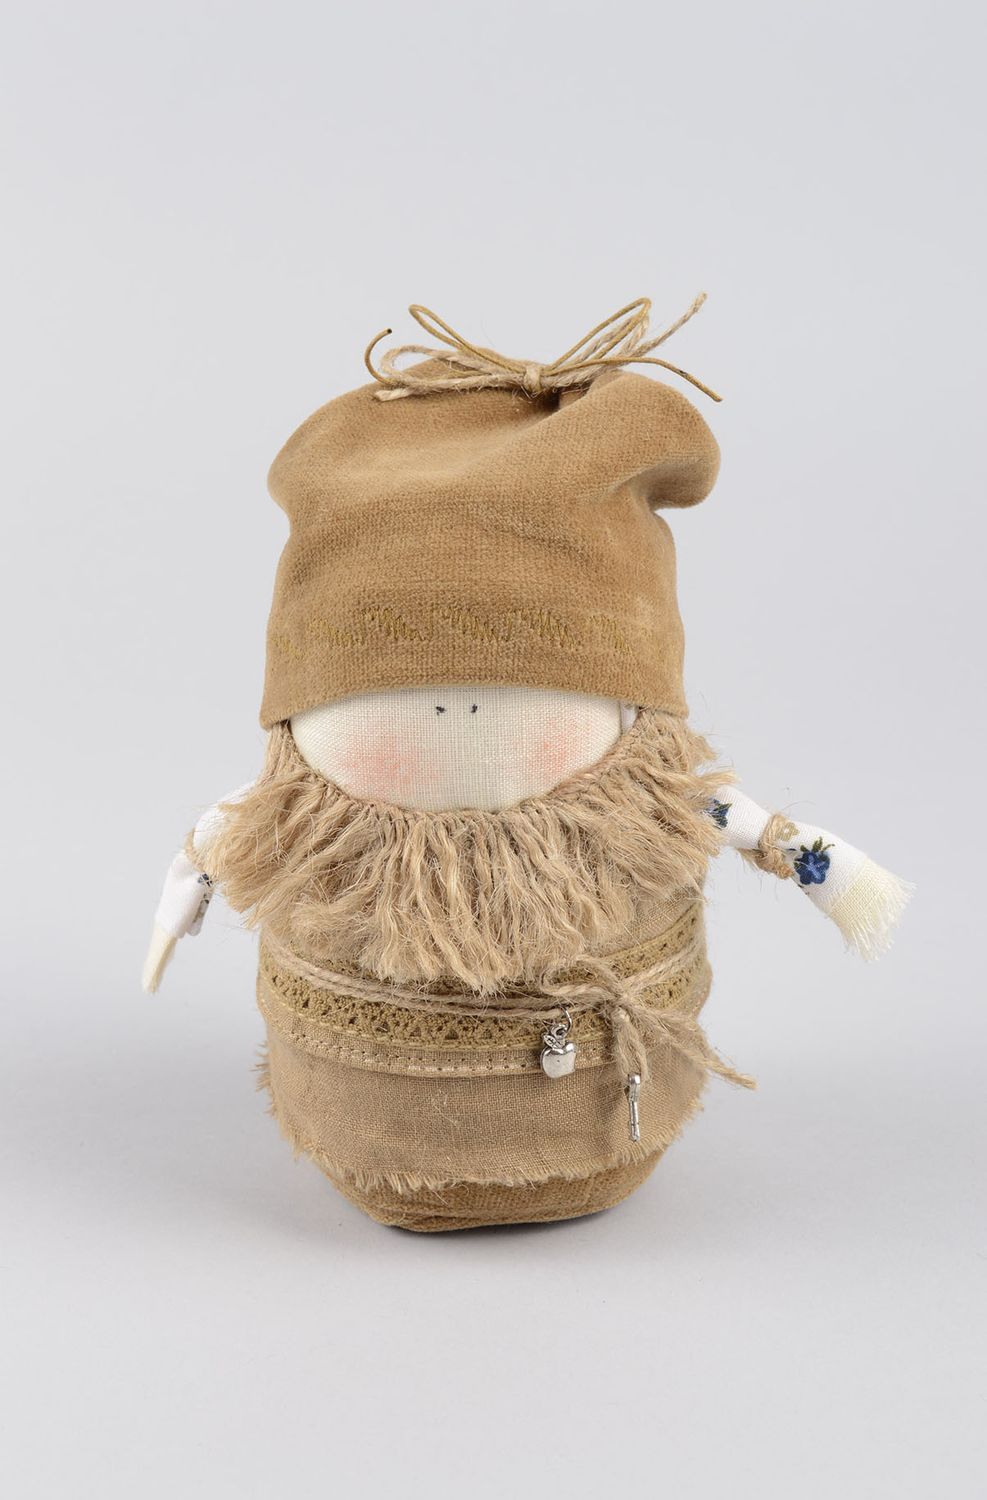 Handmade doll interior decor primitive doll for decorative use only cool gifts photo 1